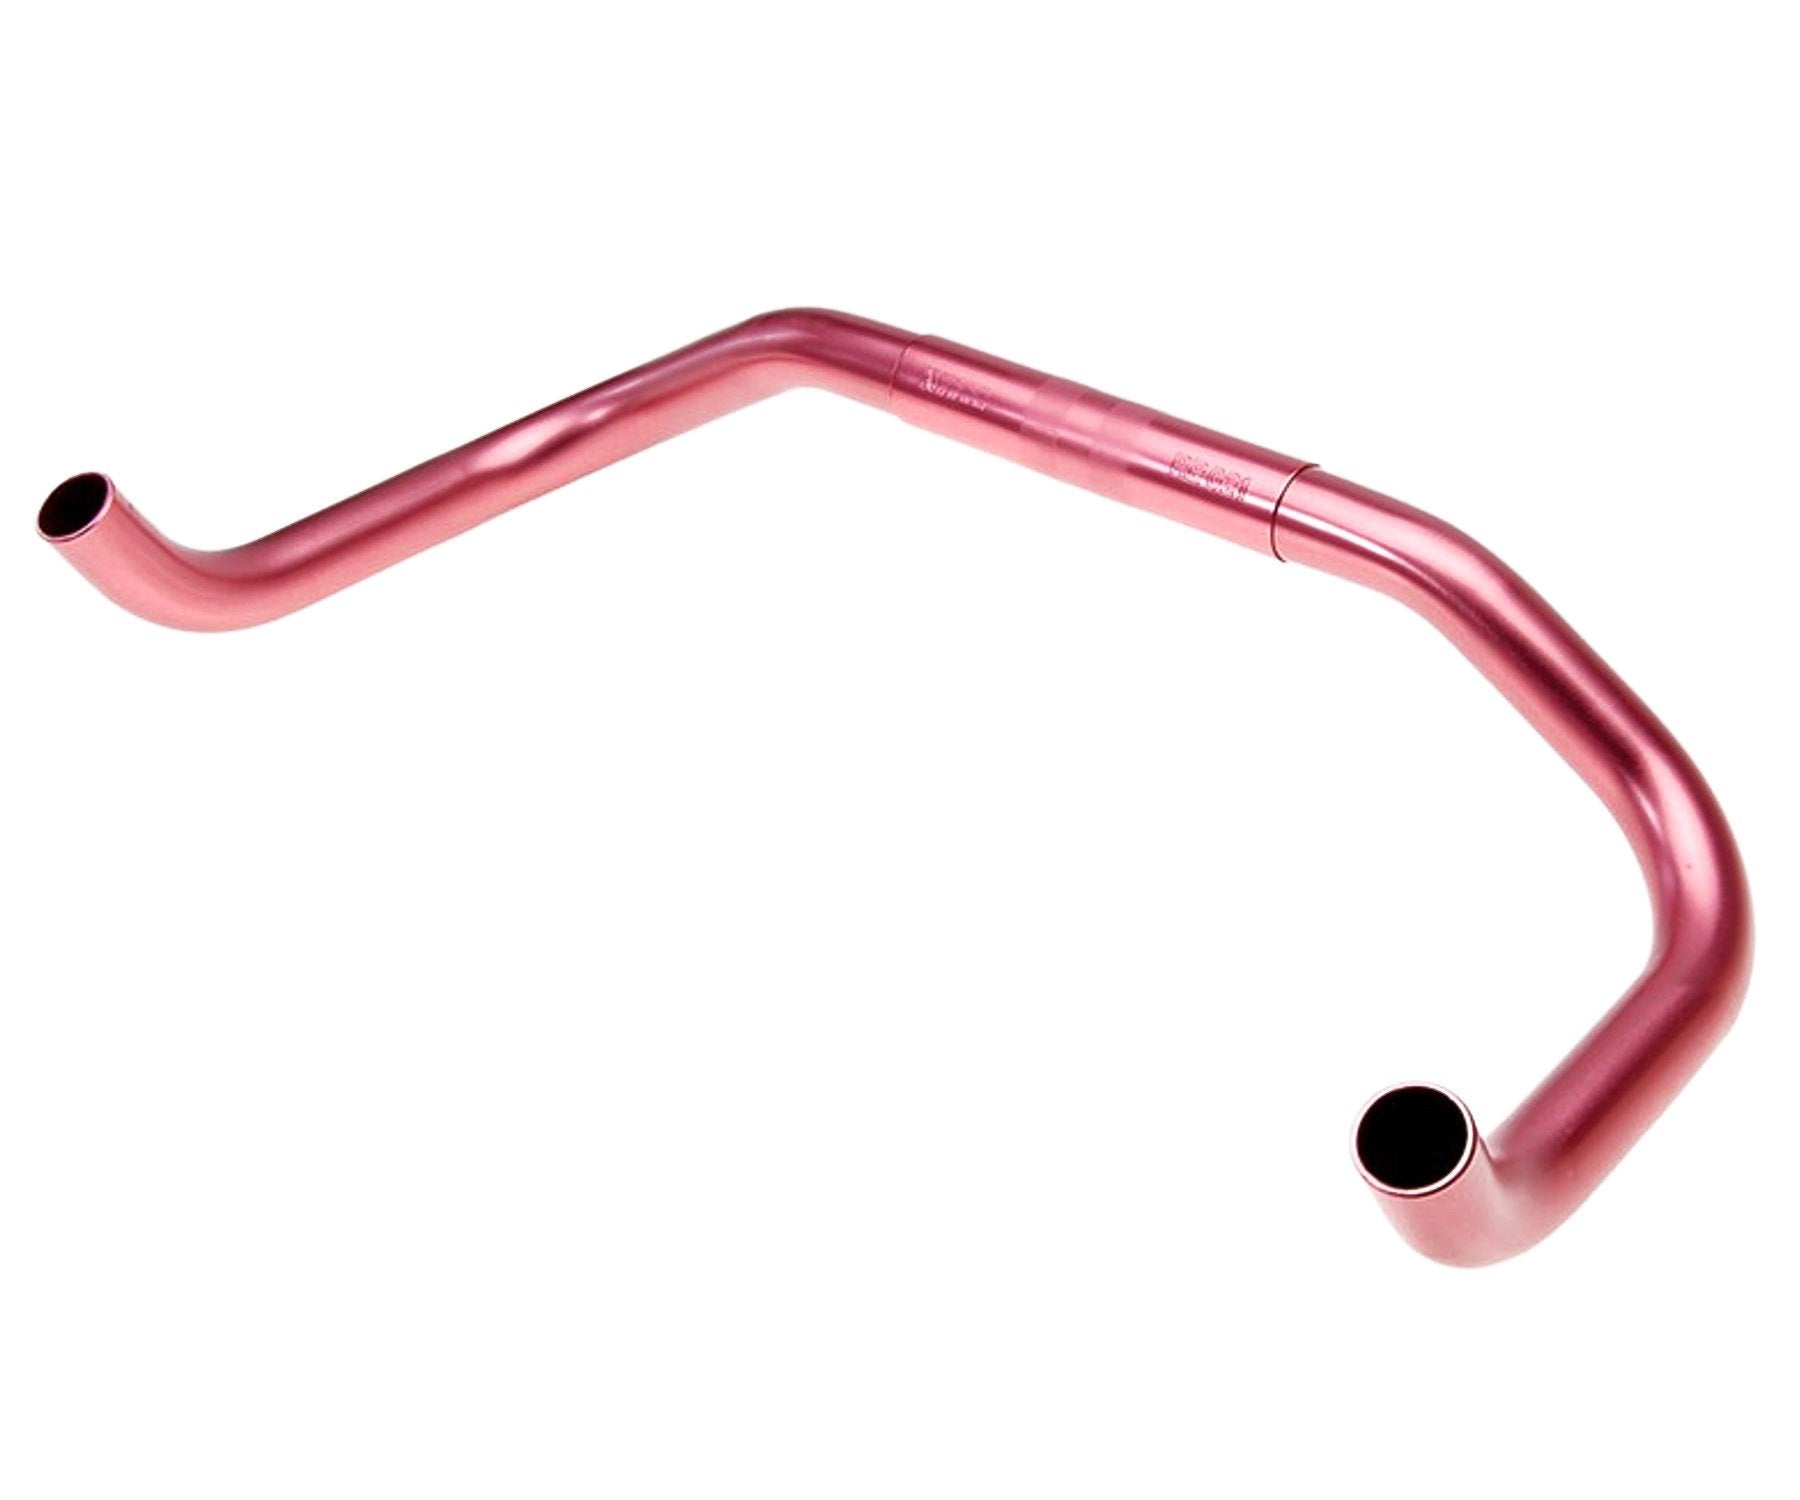 NOS Nitto RB-021 handlebar - anodized colors - Retrogression Fixed Gear